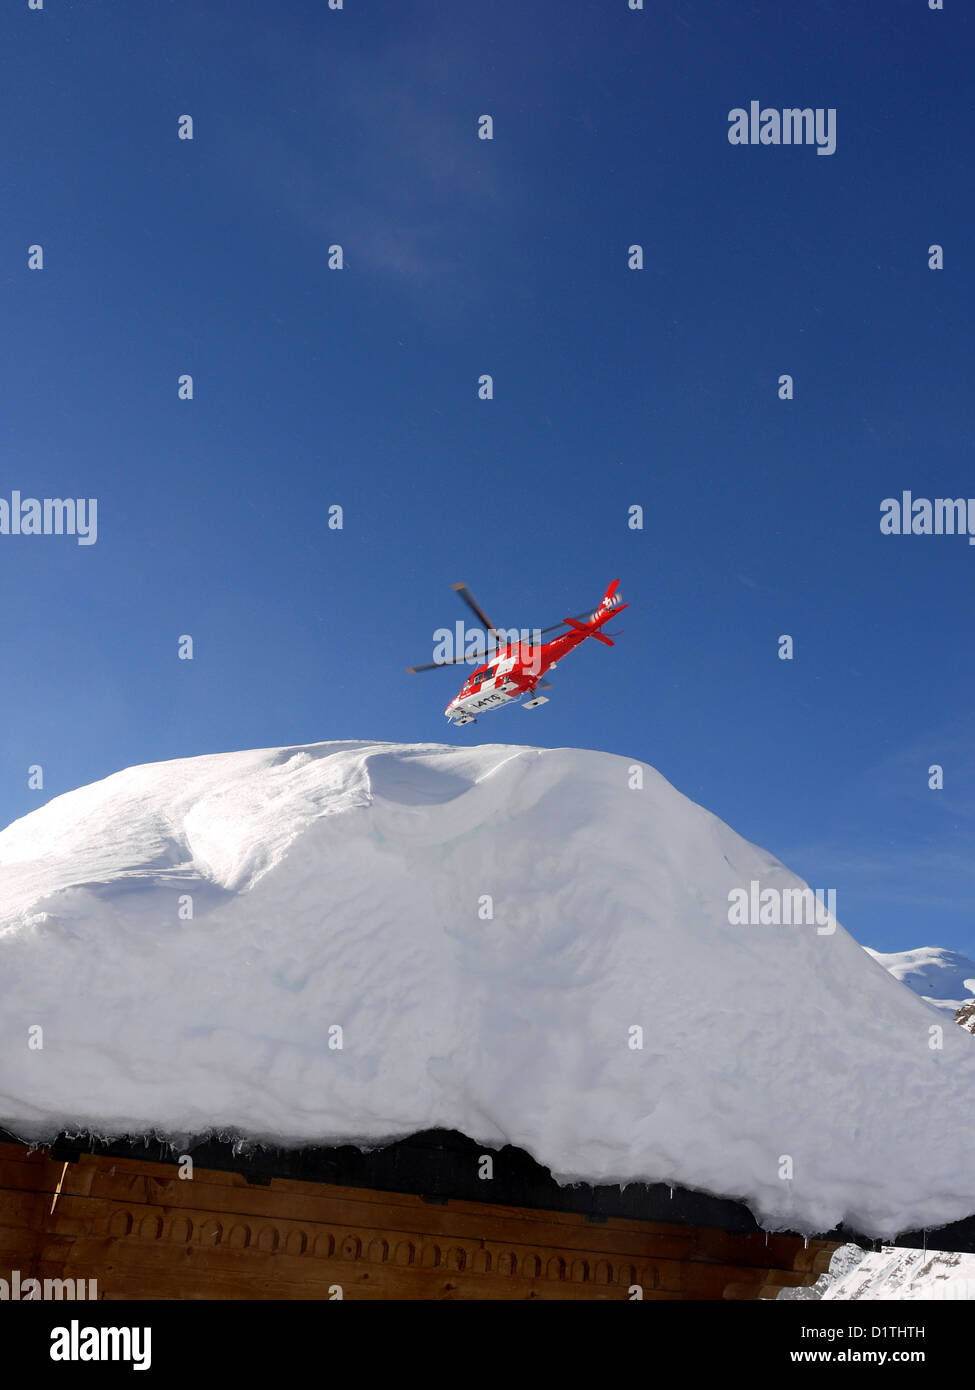 Rega Swiss mountain rescue helicopter flying over a chalet roof laden with snow Stock Photo